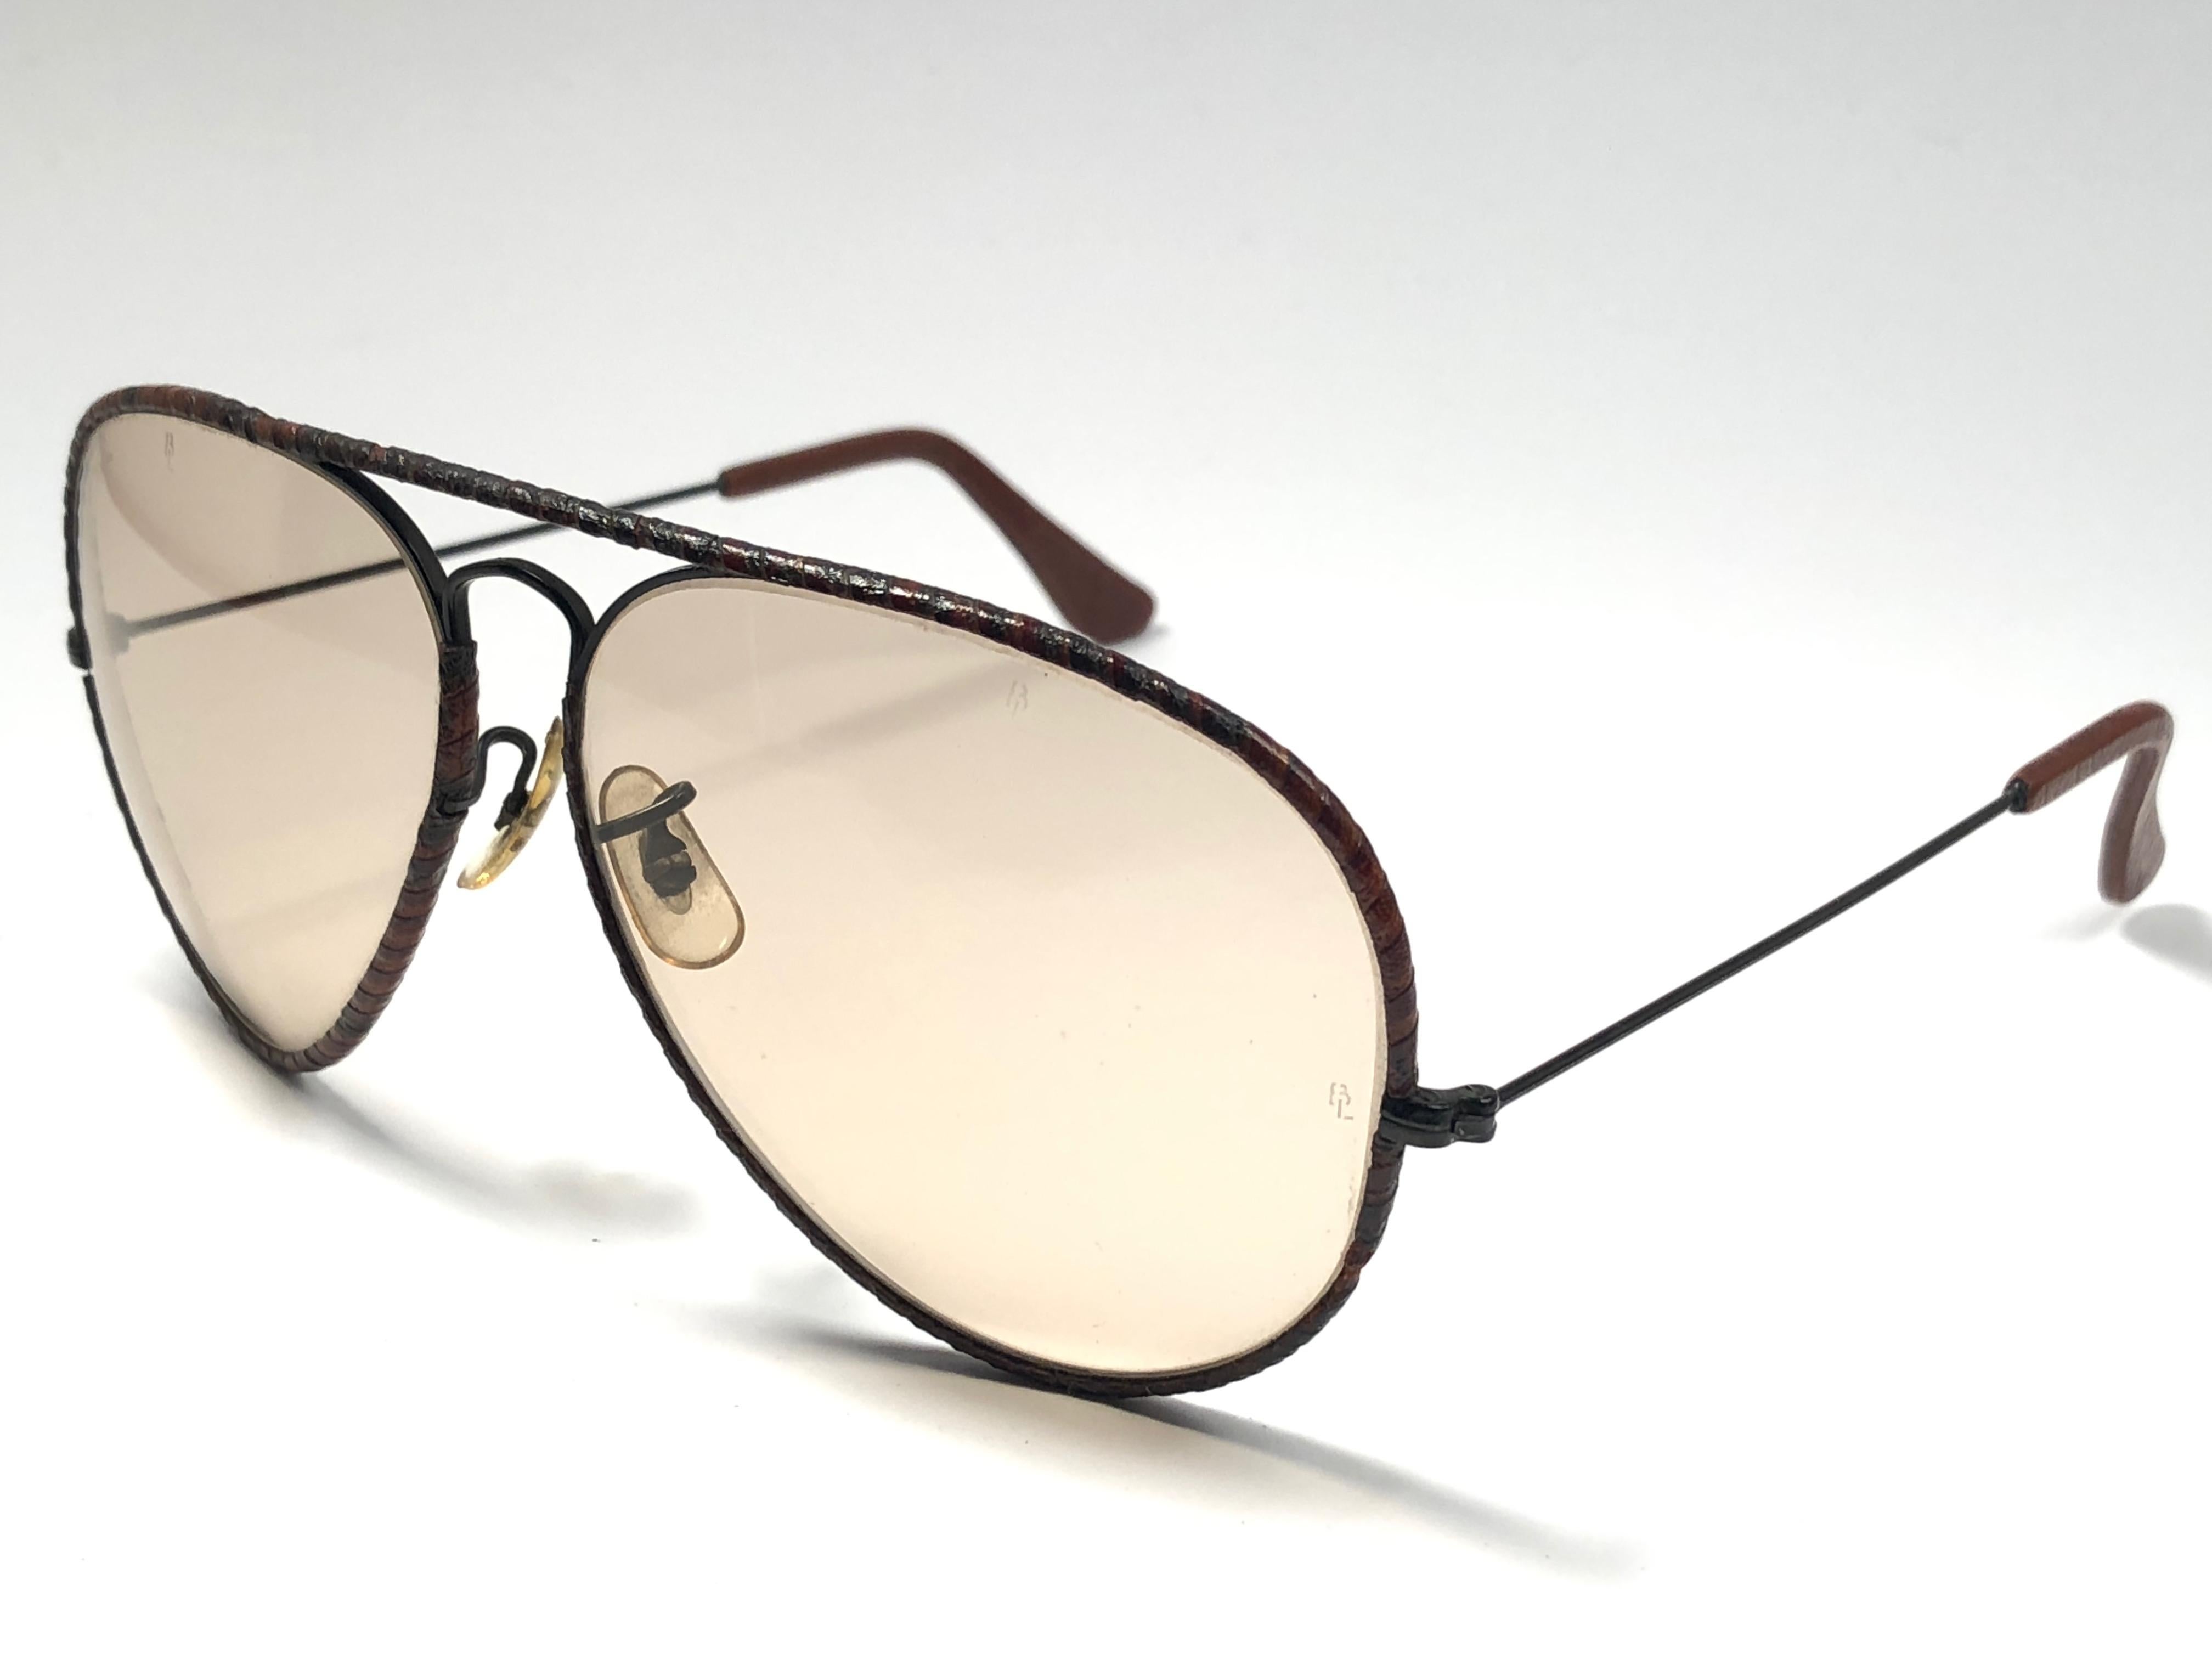 ray ban aviator with leather trim